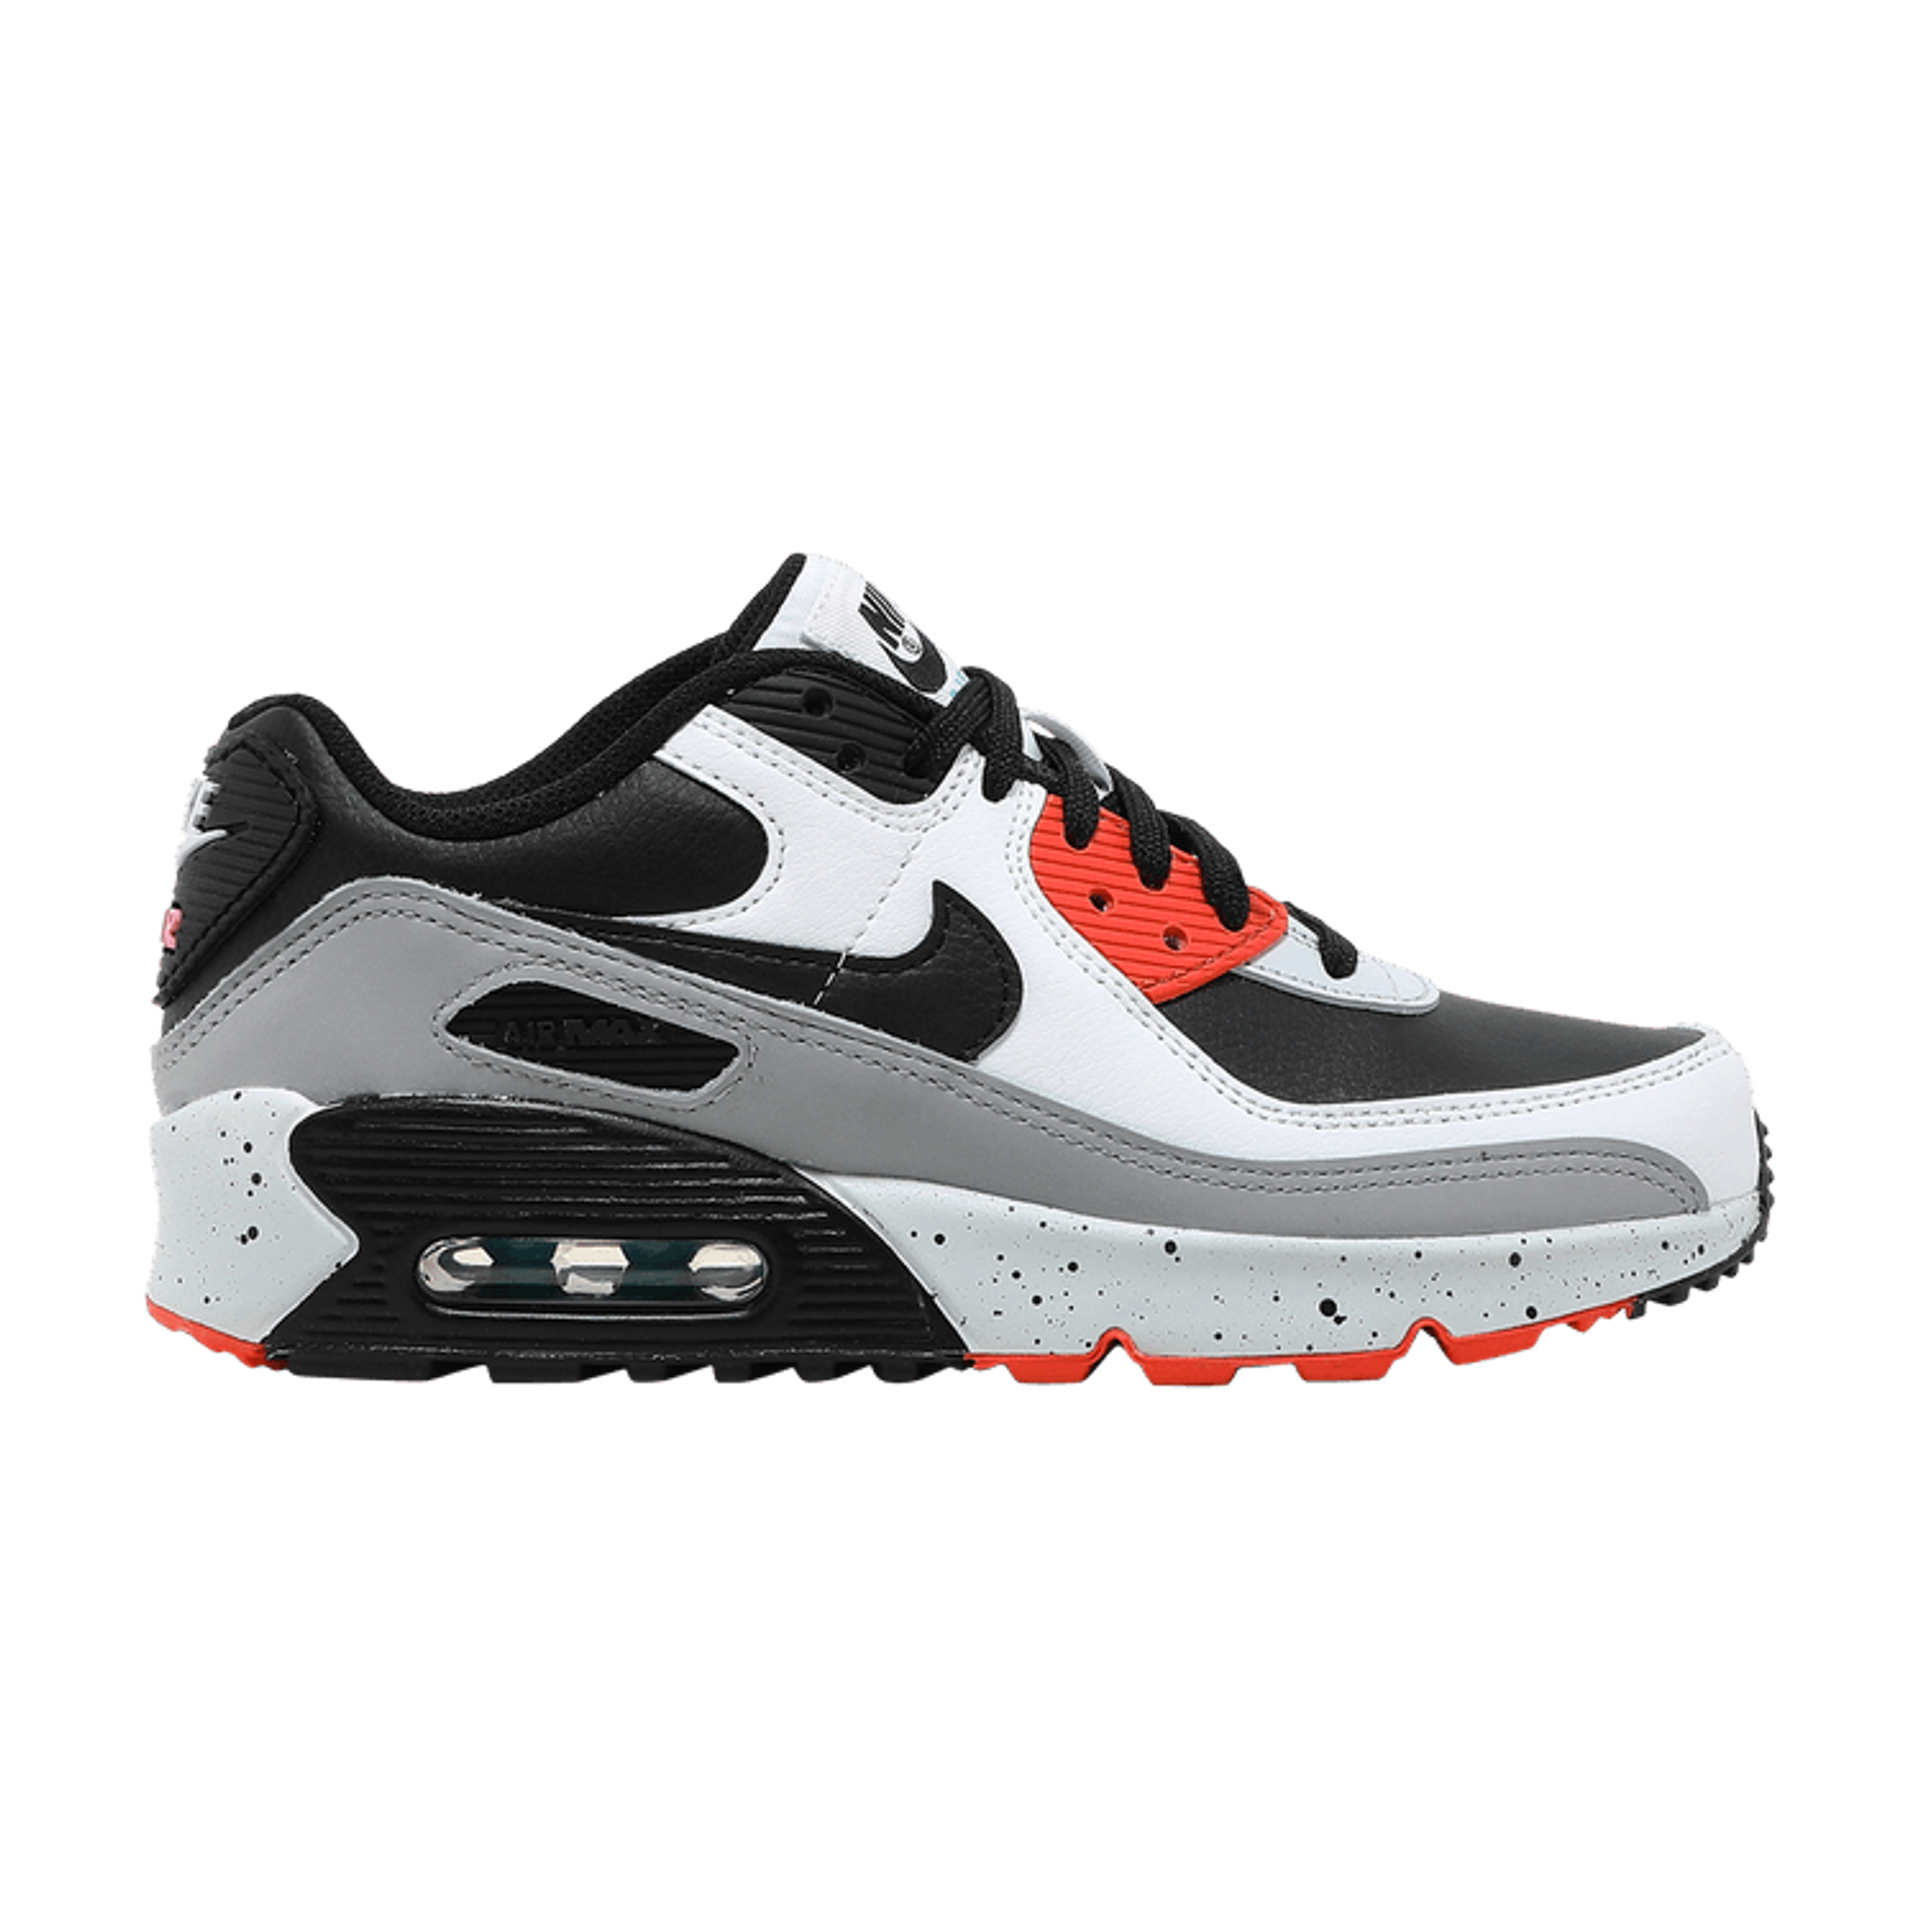 Air Max 90 Leather GS 'White Turf Orange Speckled' - CD6864 110 | Ox Street